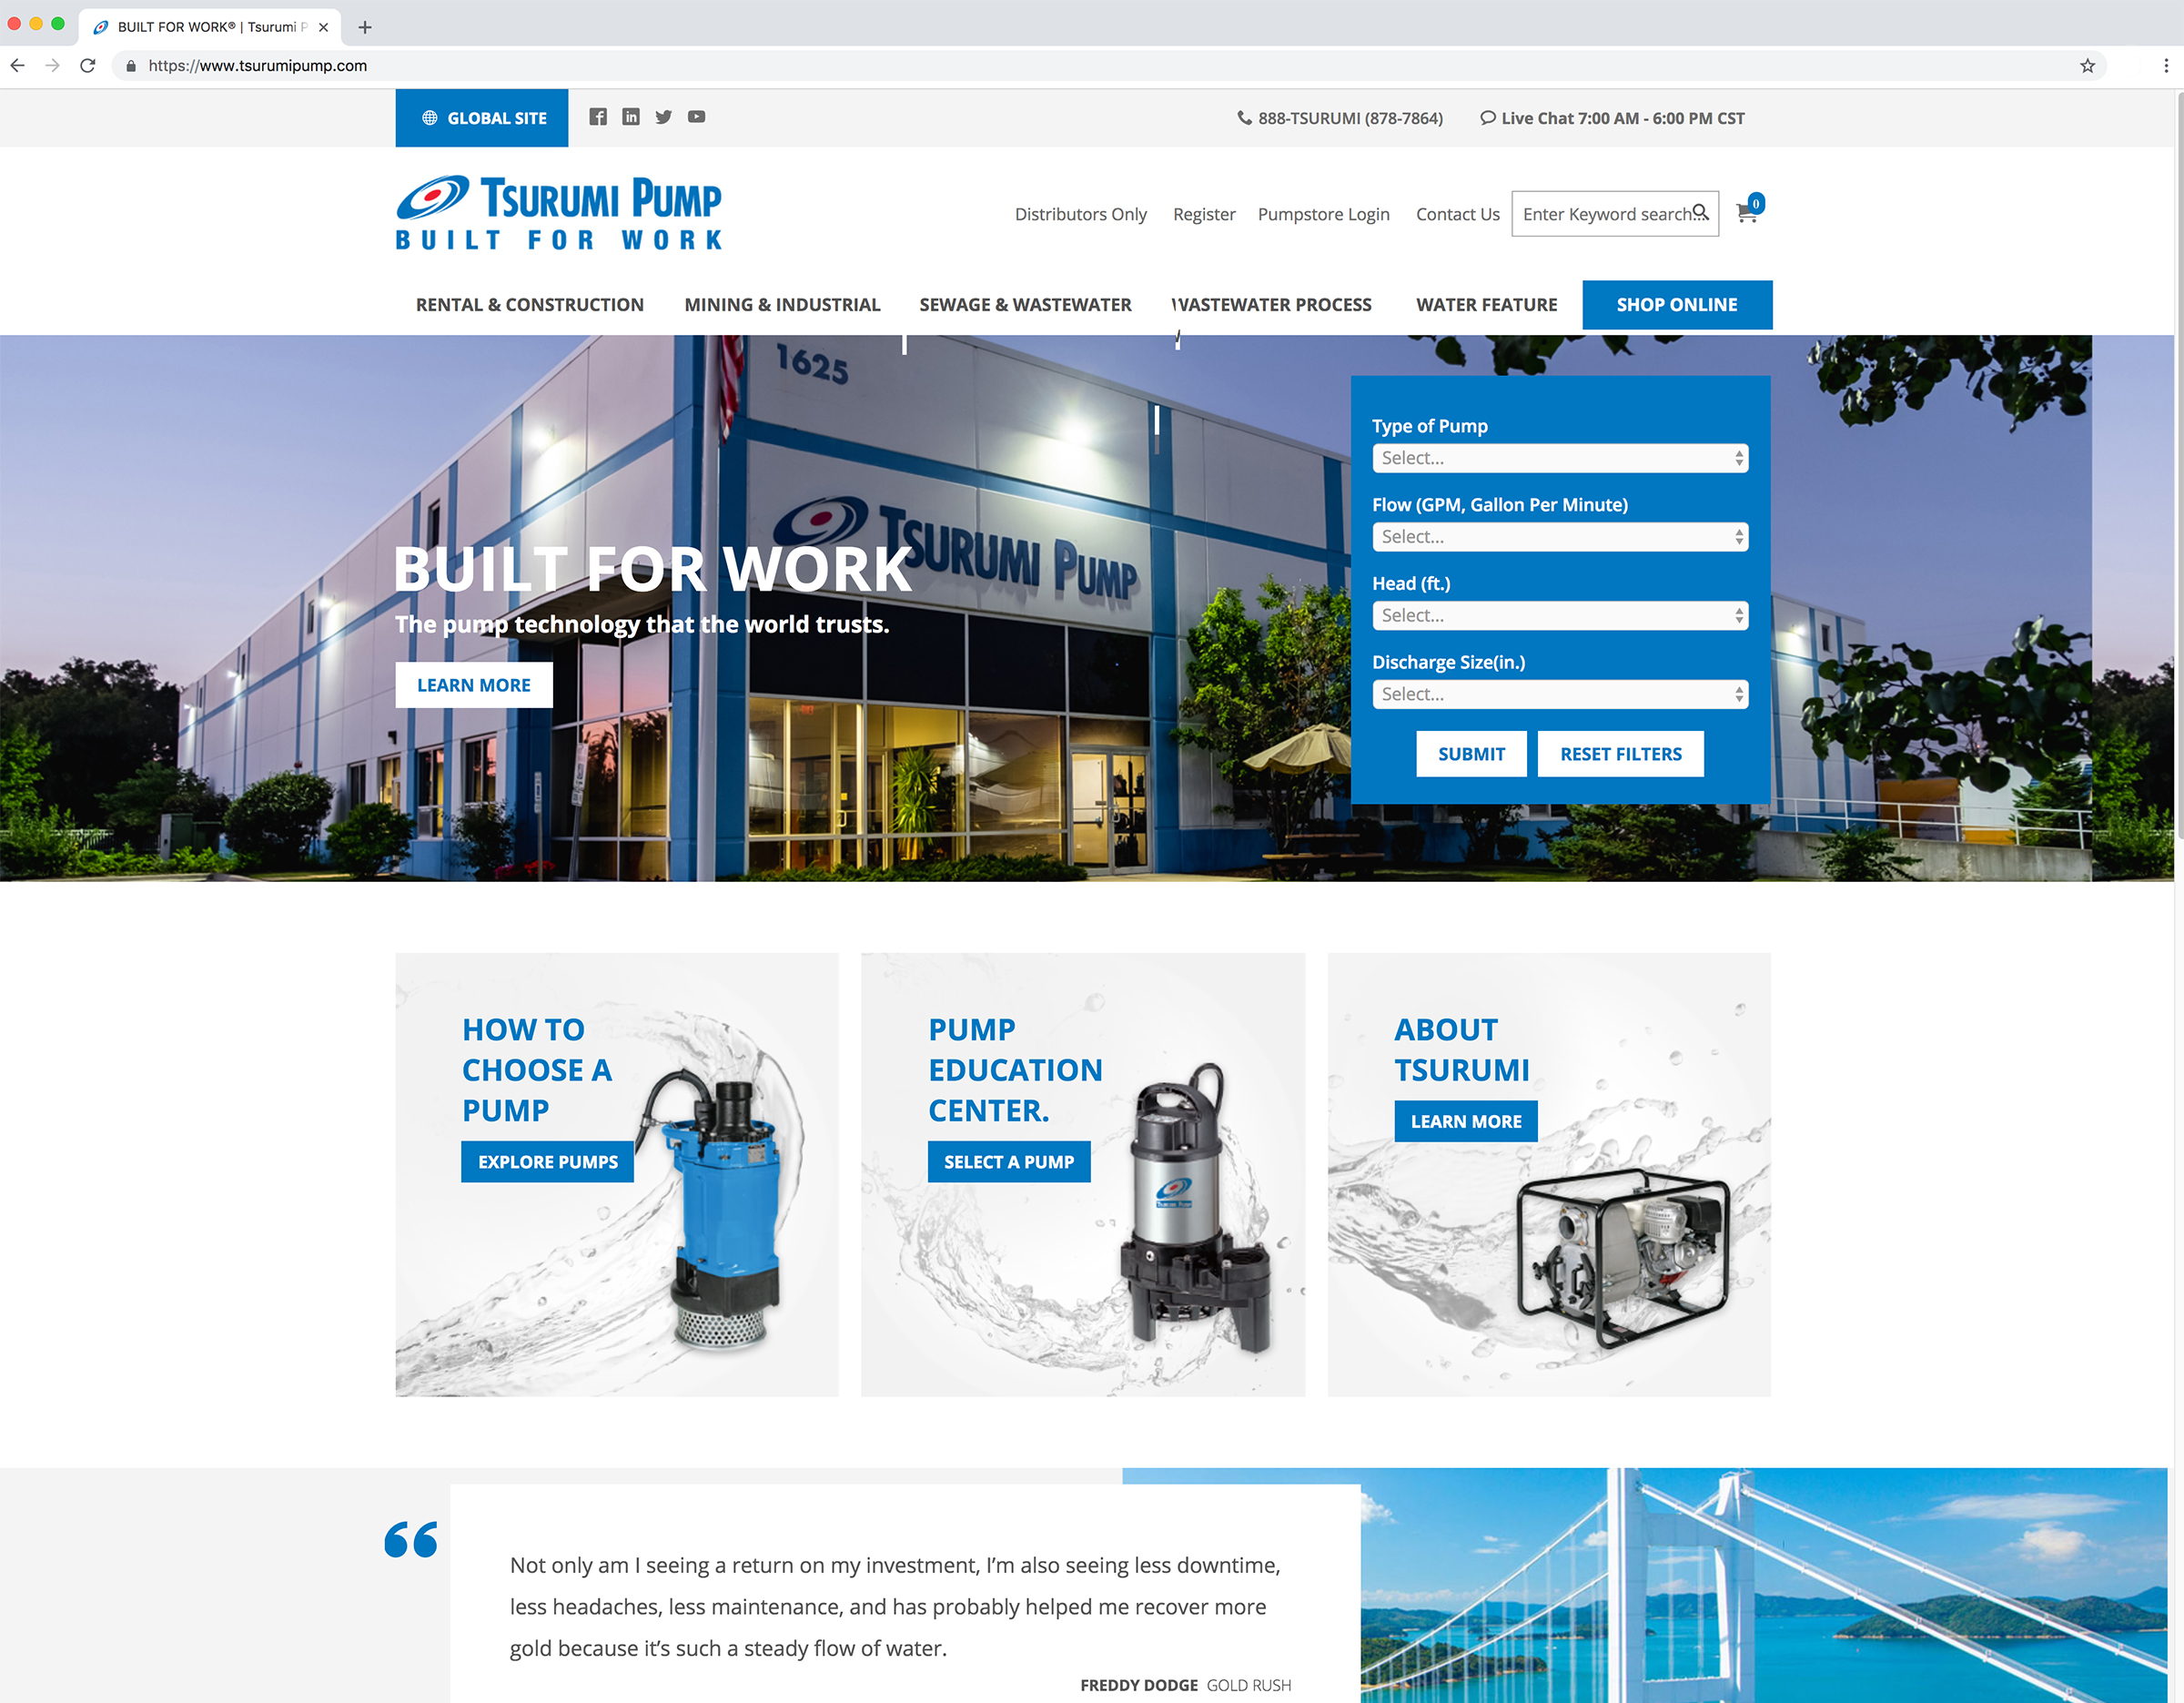 Tsurumi America's new website combines its informational site and online store.